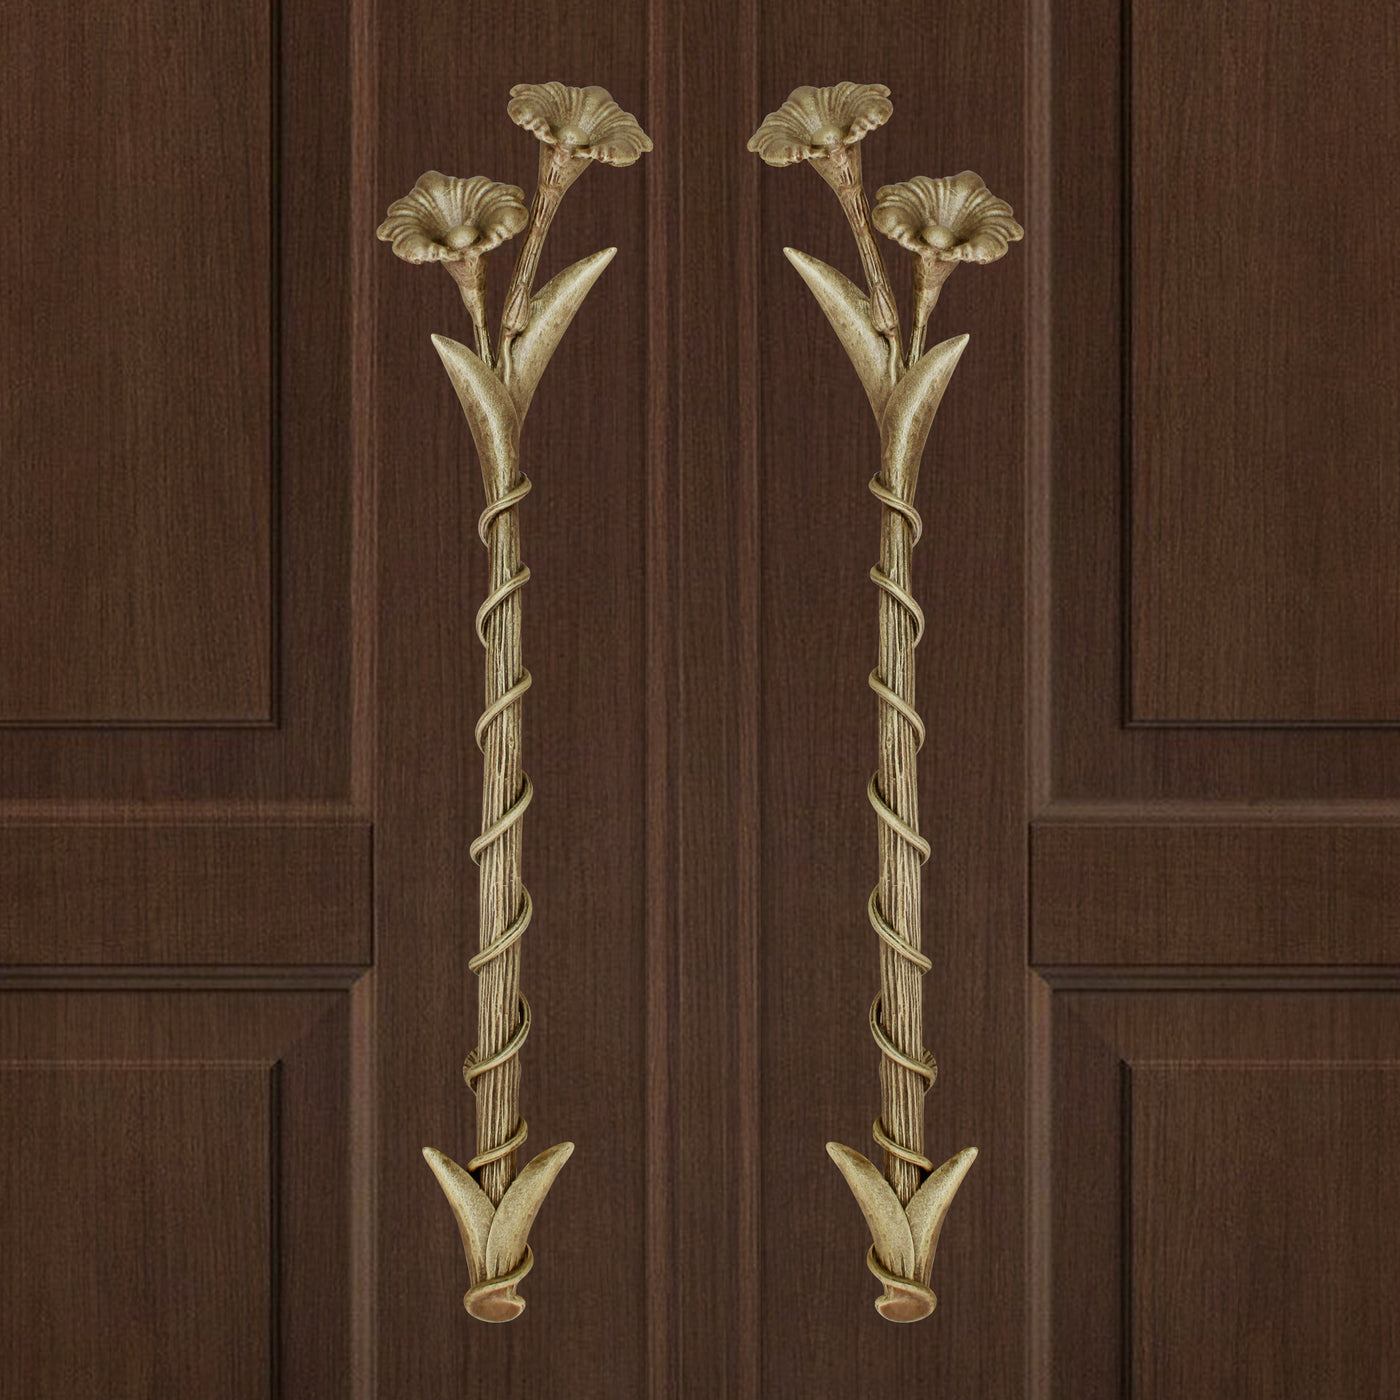 A pair of light bronze decorative accent pull handles inspired by flowers mounted on a closed wooden door